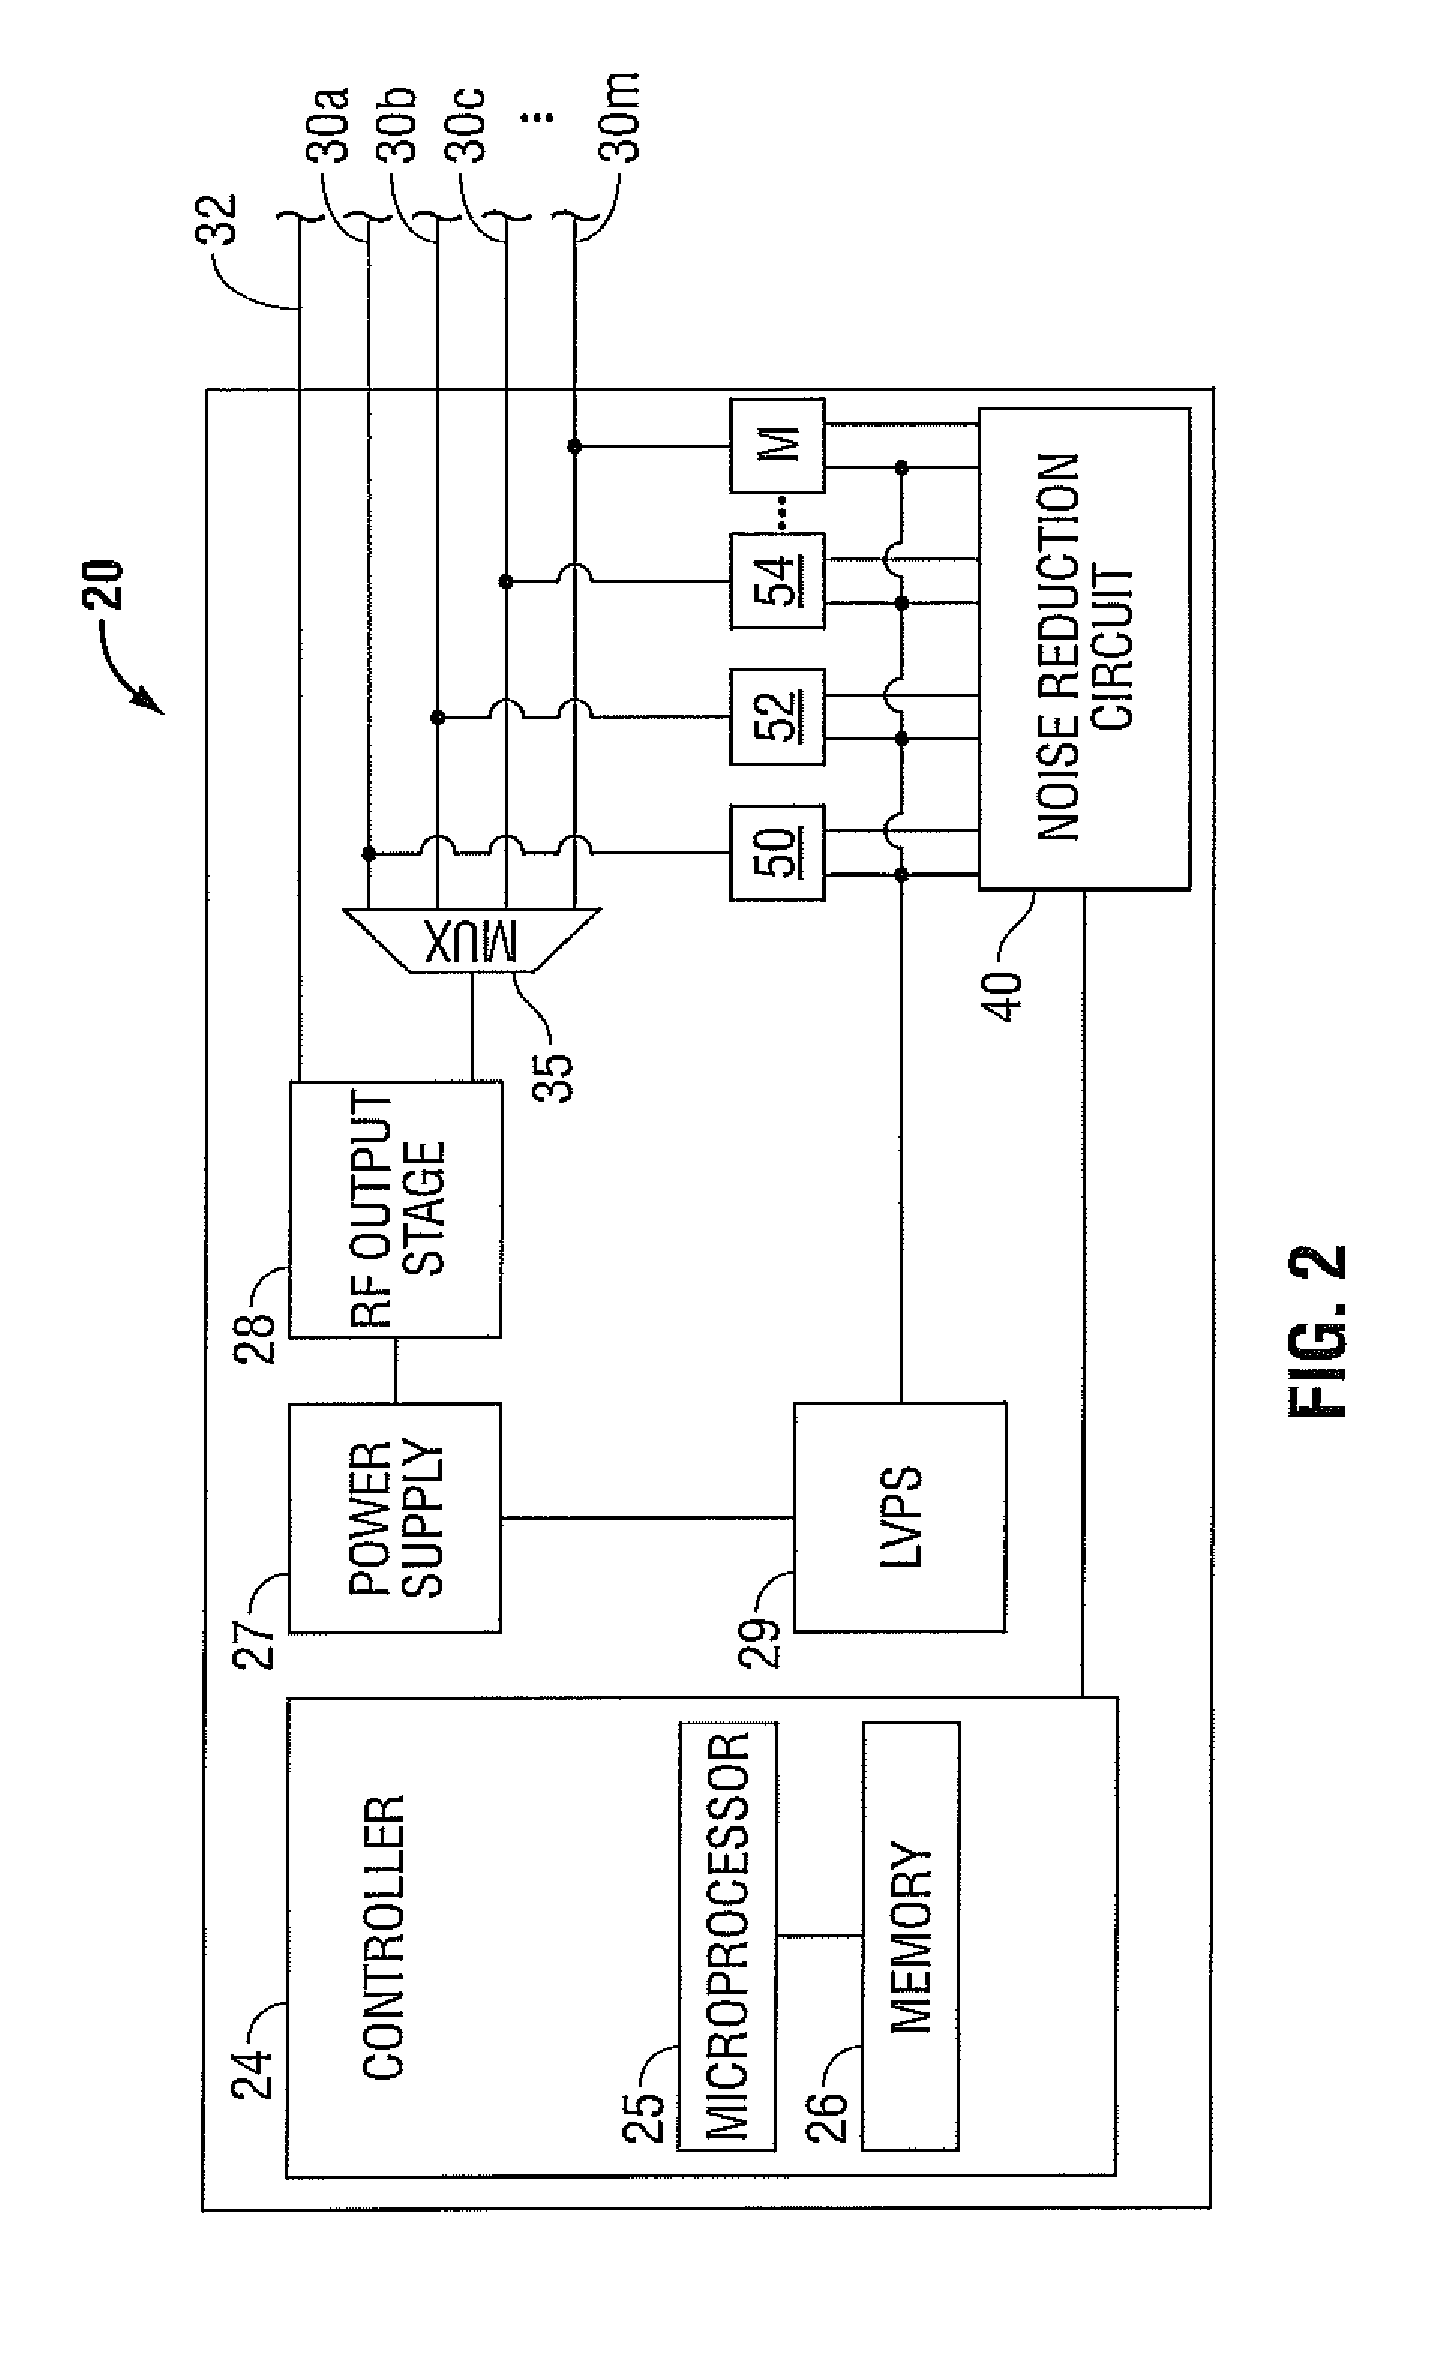 System and method for power supply noise reduction